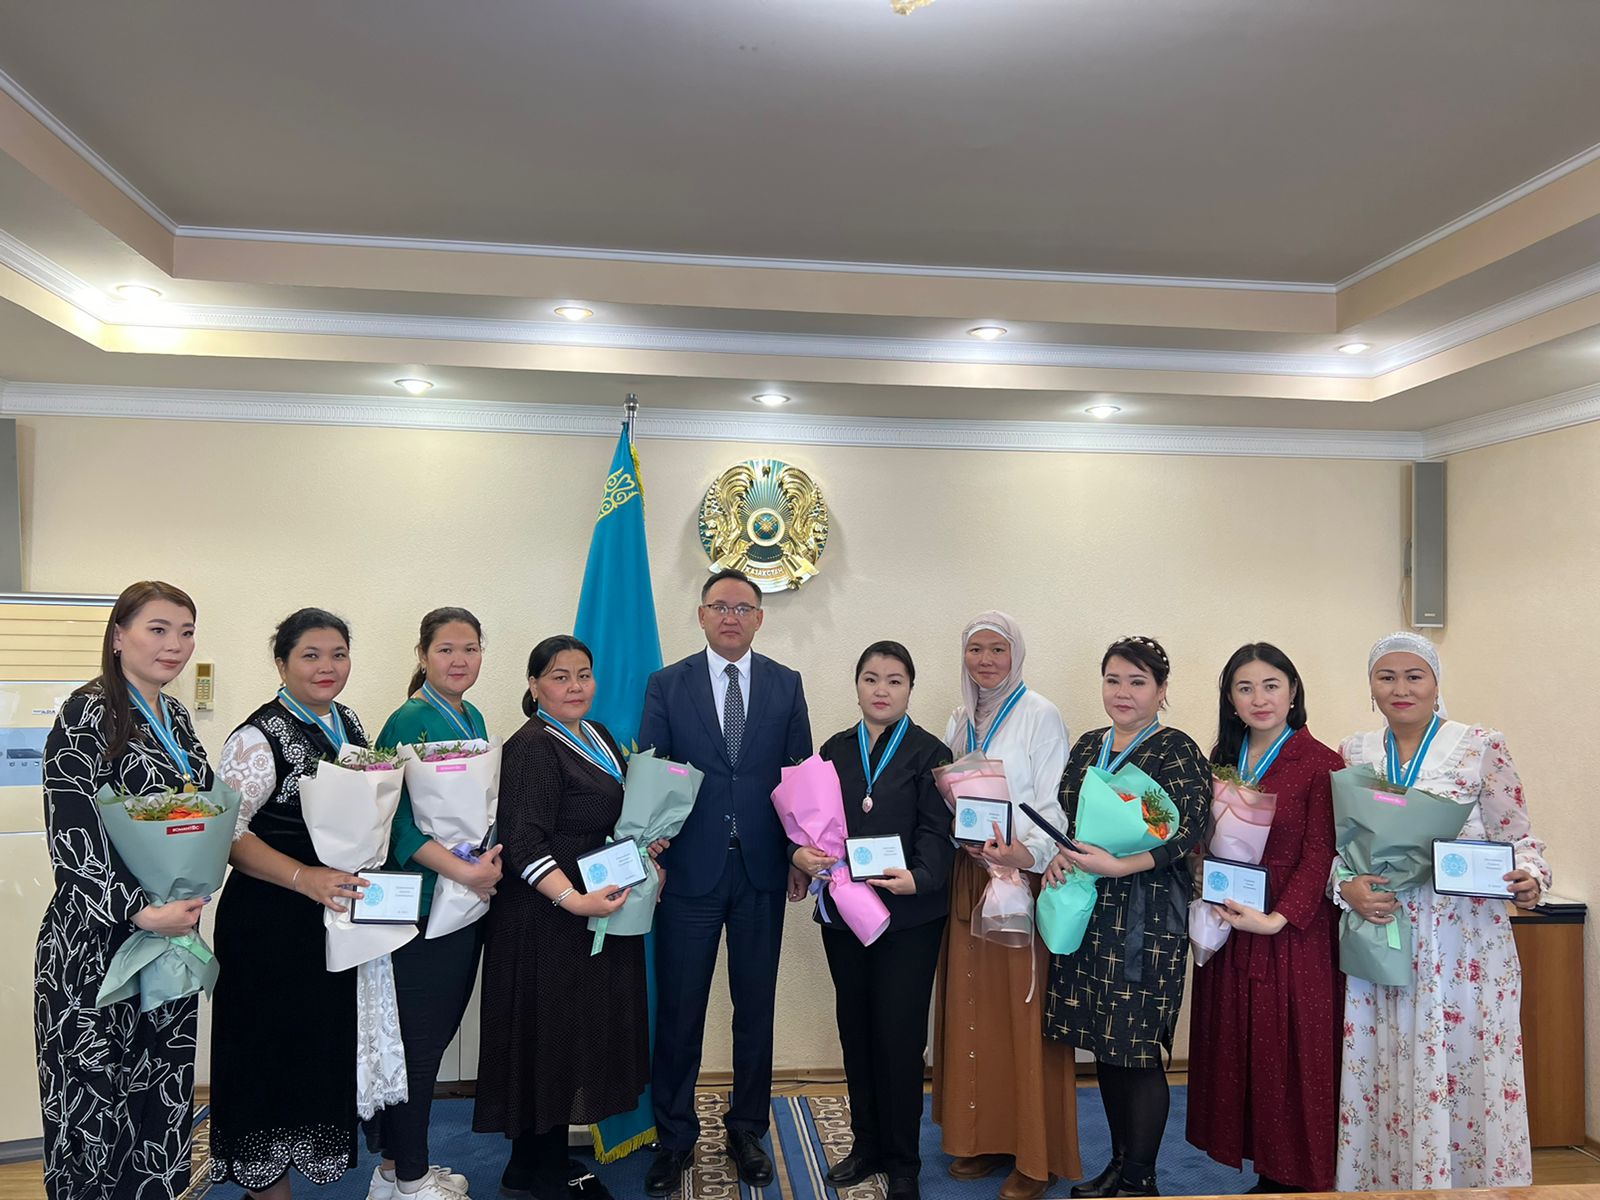 Mothers with many children were awarded in Aktau